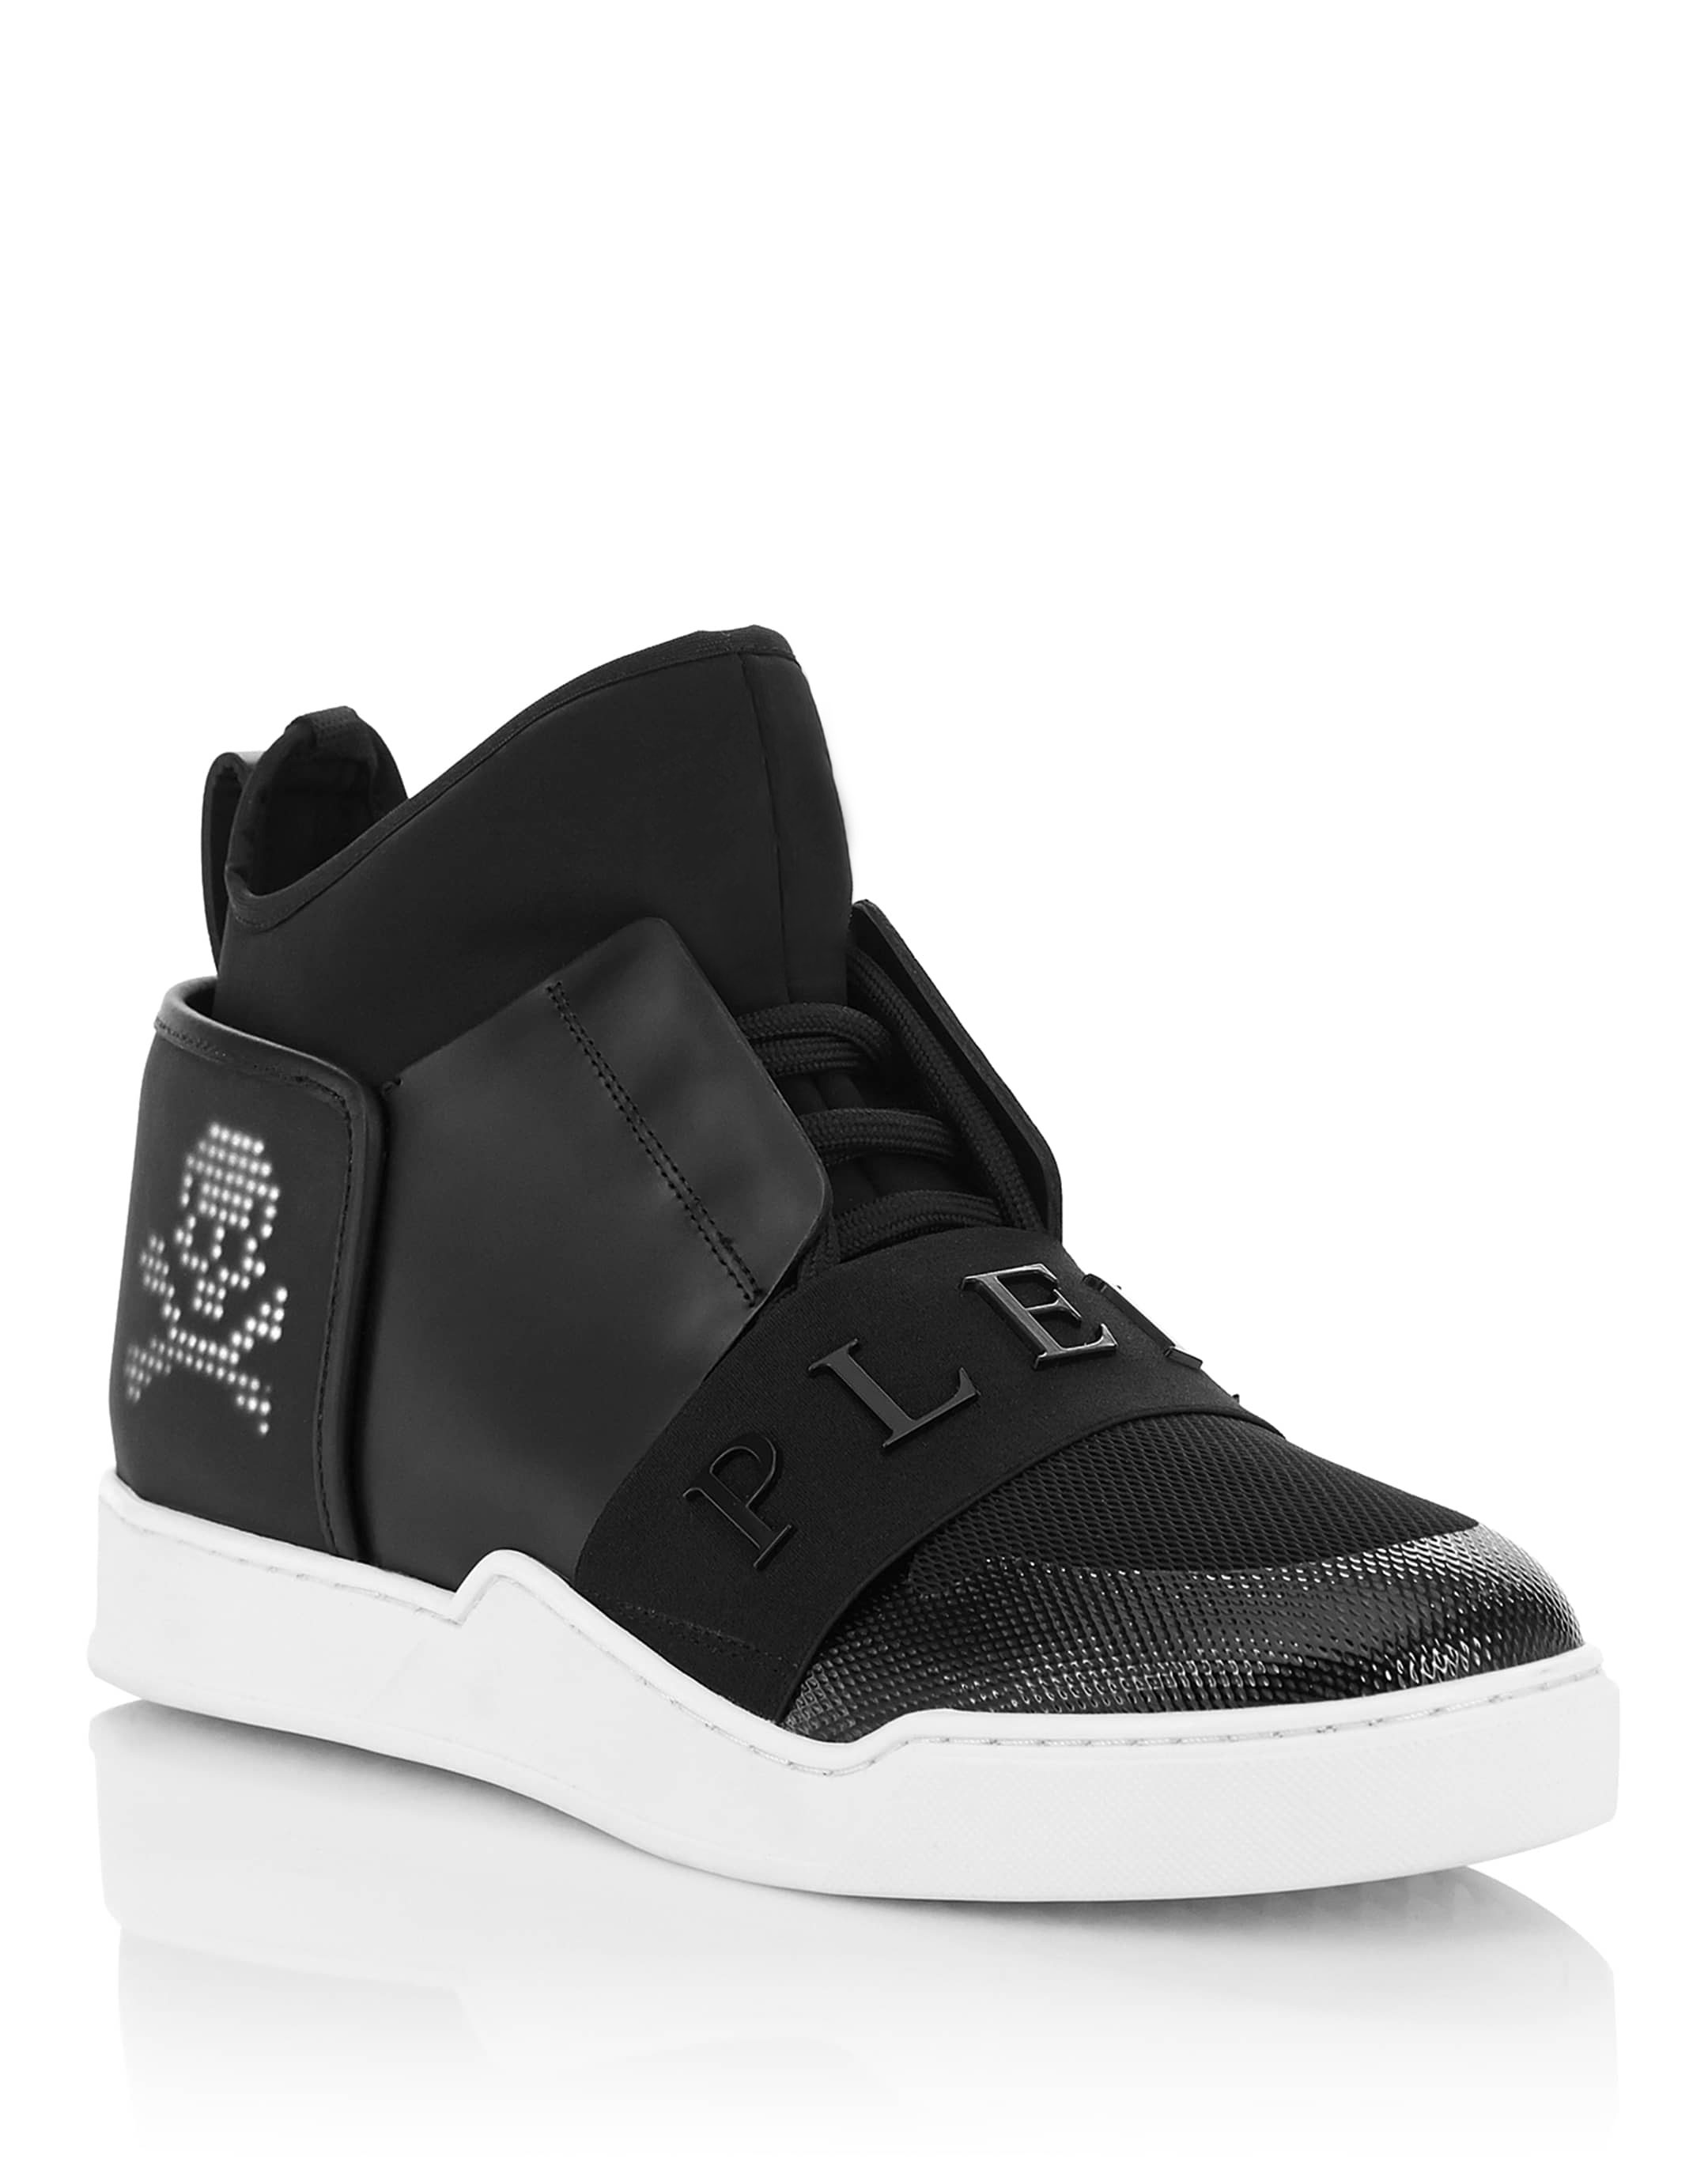 philipp plein shoes with screen